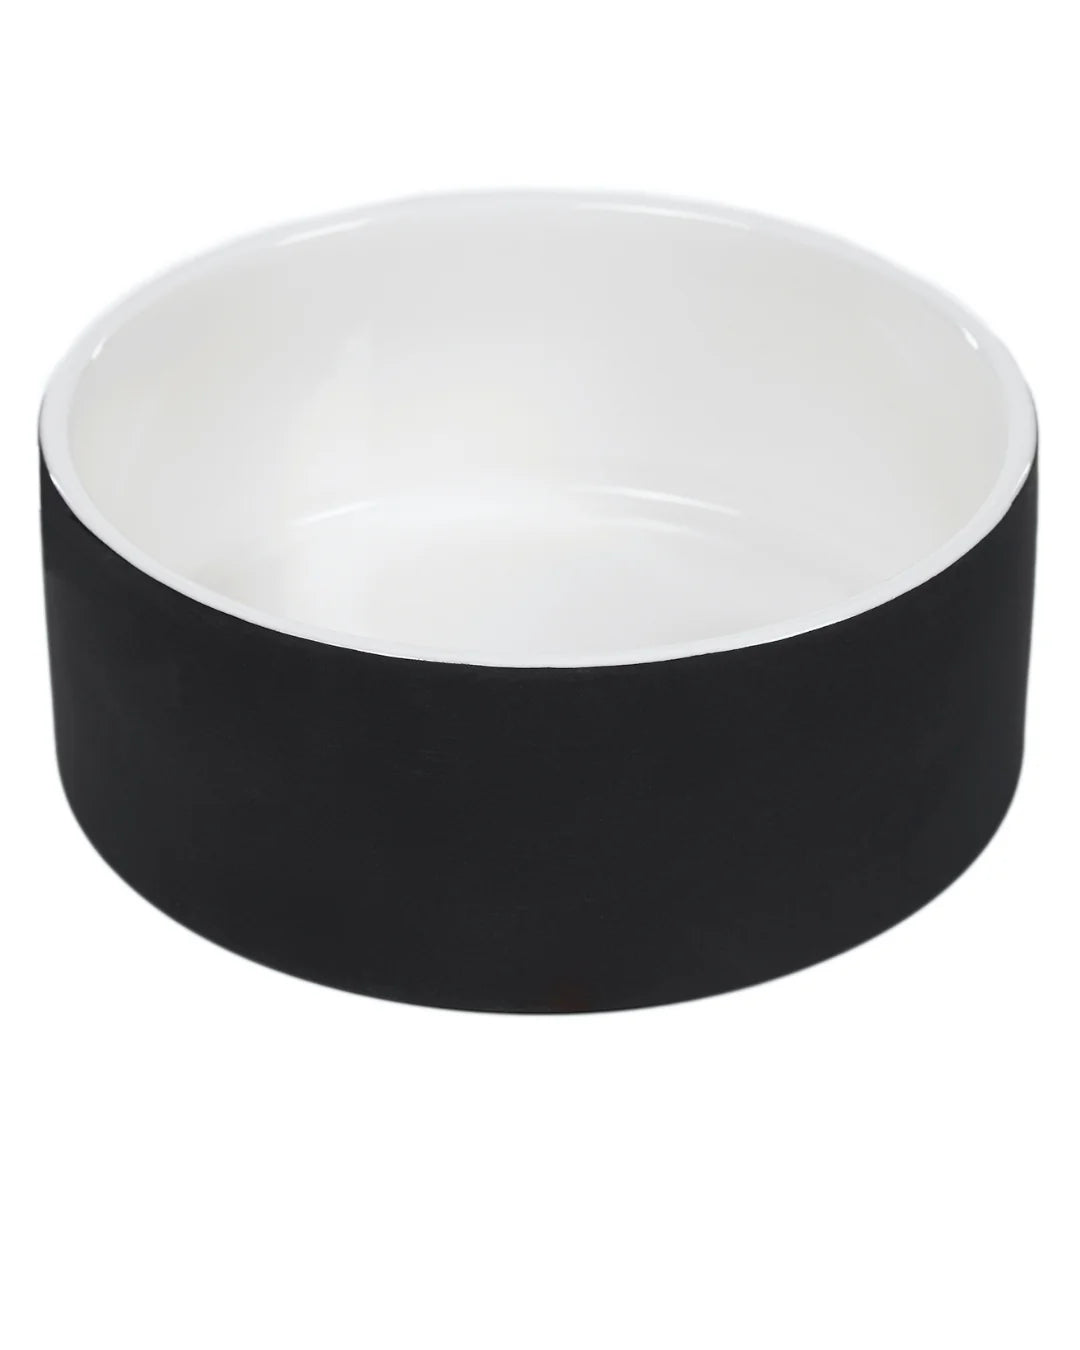 Cool Bowl Black L for Dogs